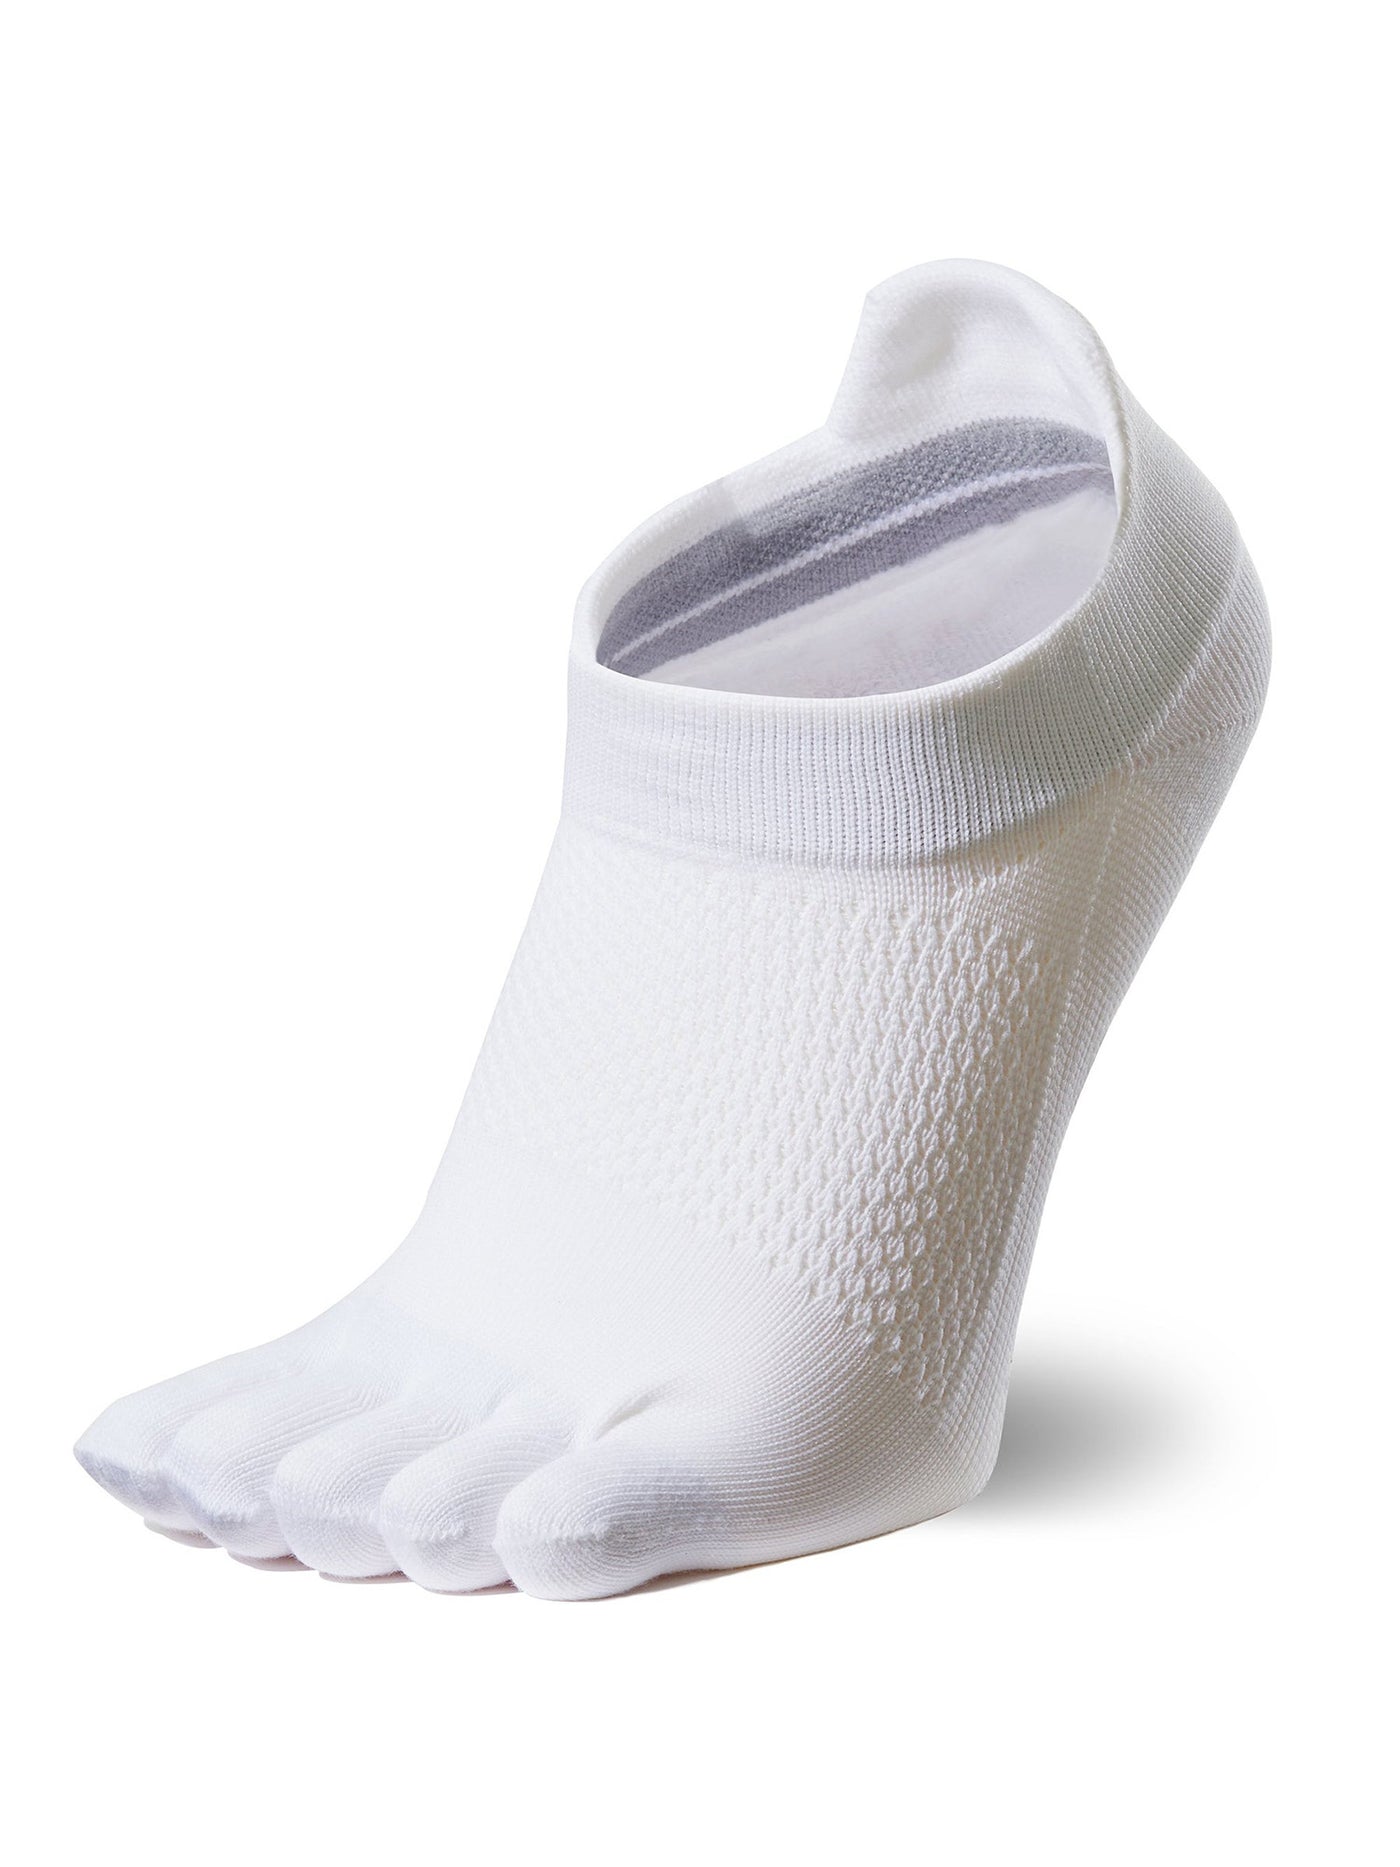 5-Toe C3fit Arch Support Short Socks